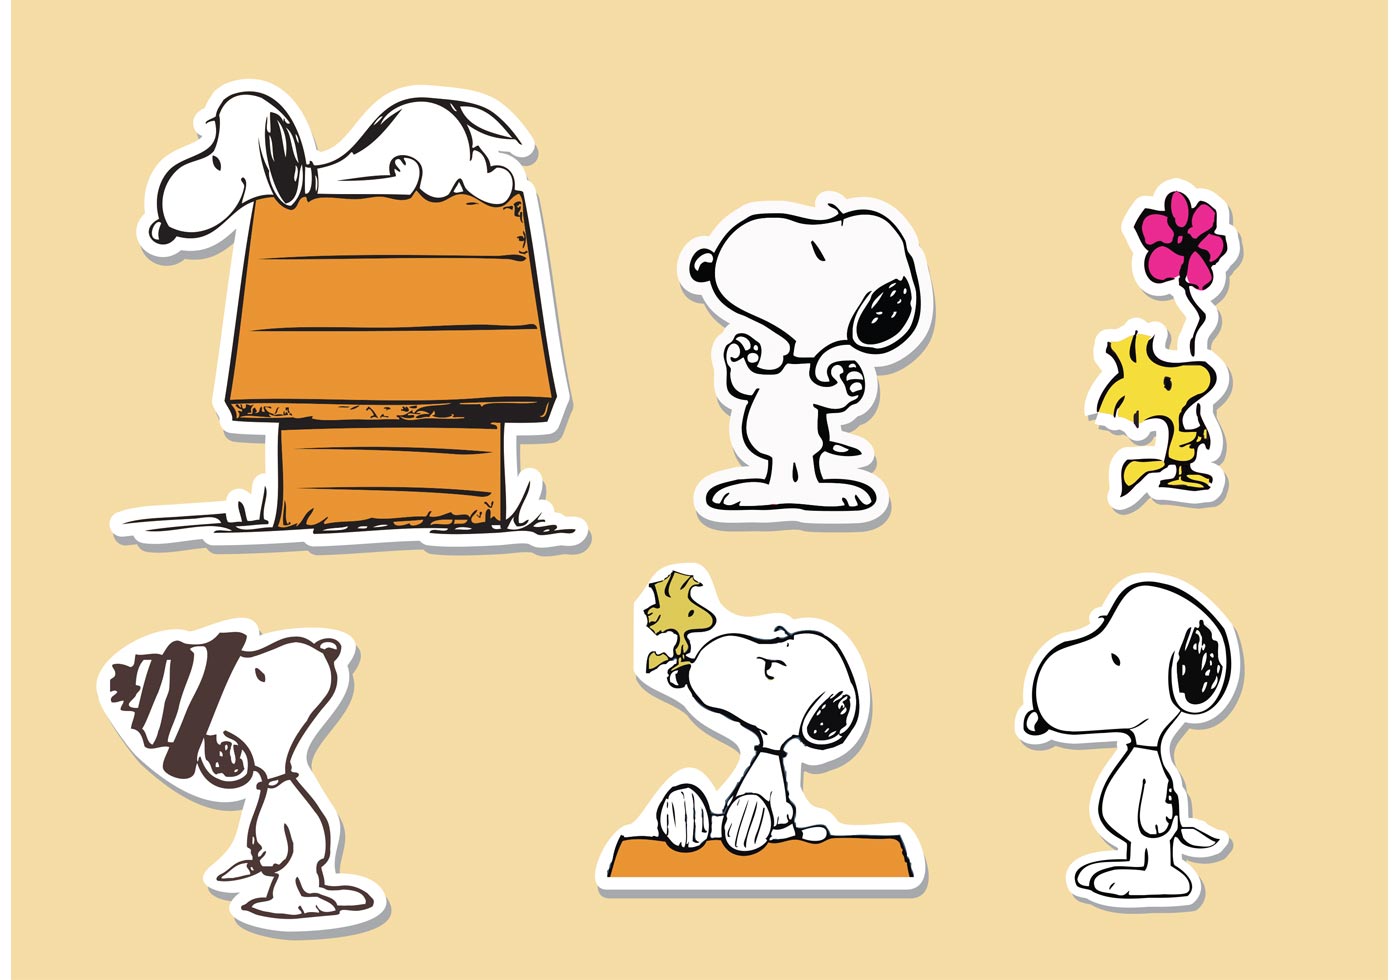 Snoopy Sticker Vectors Download Free Clipart.